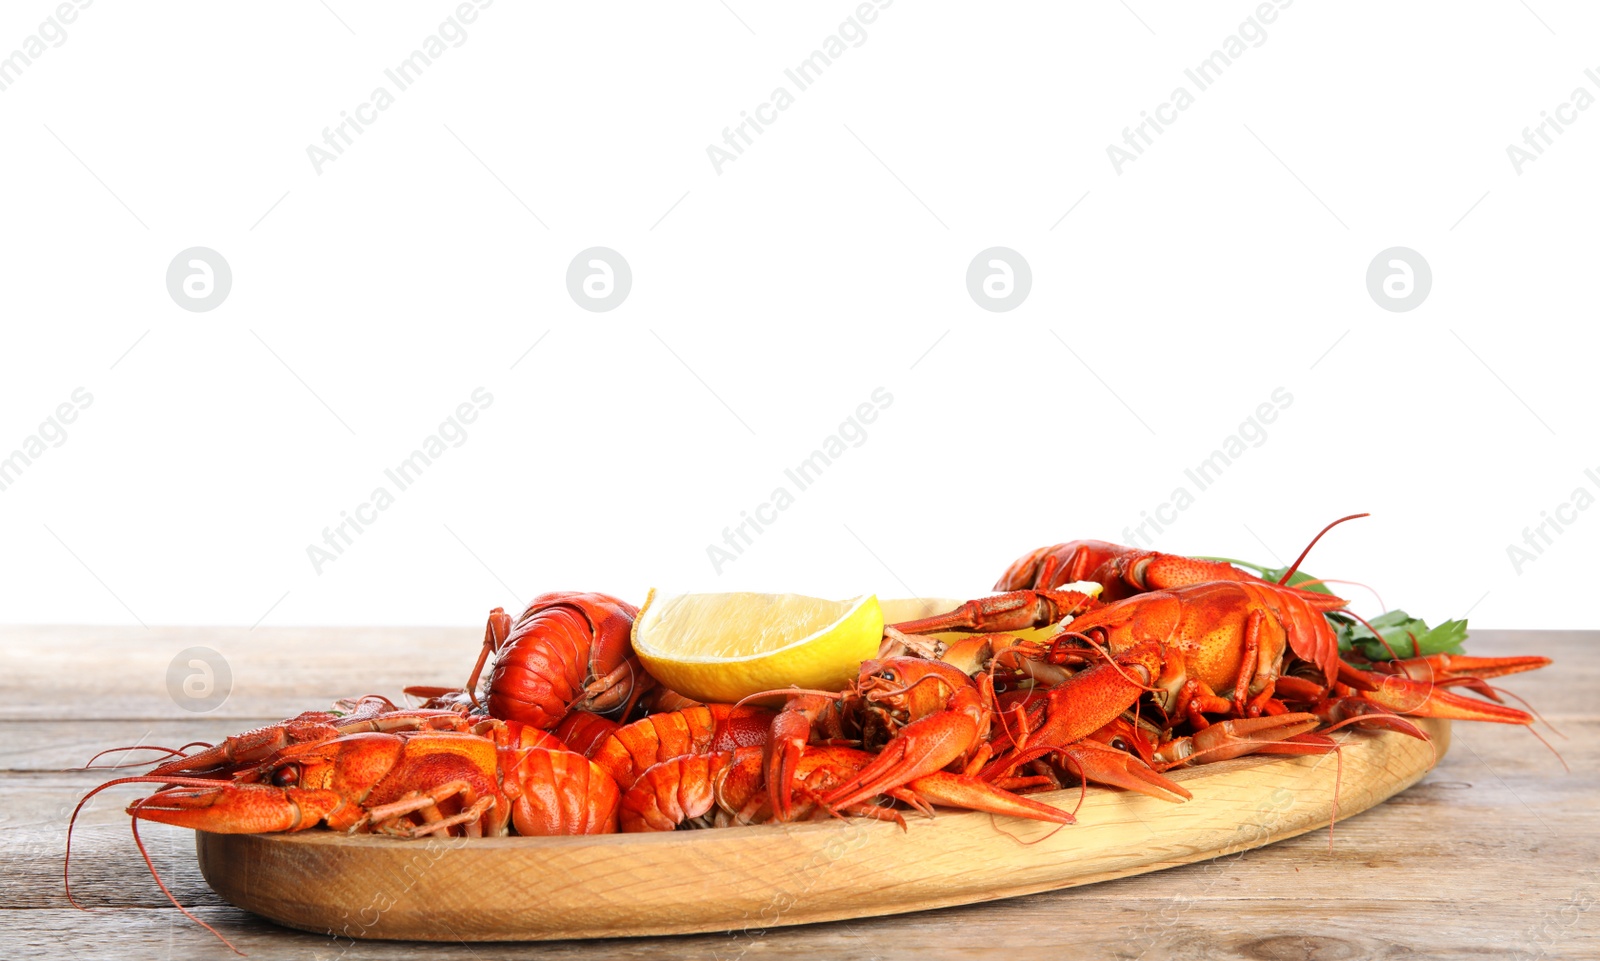 Photo of Delicious boiled crayfishes on wooden table against white background